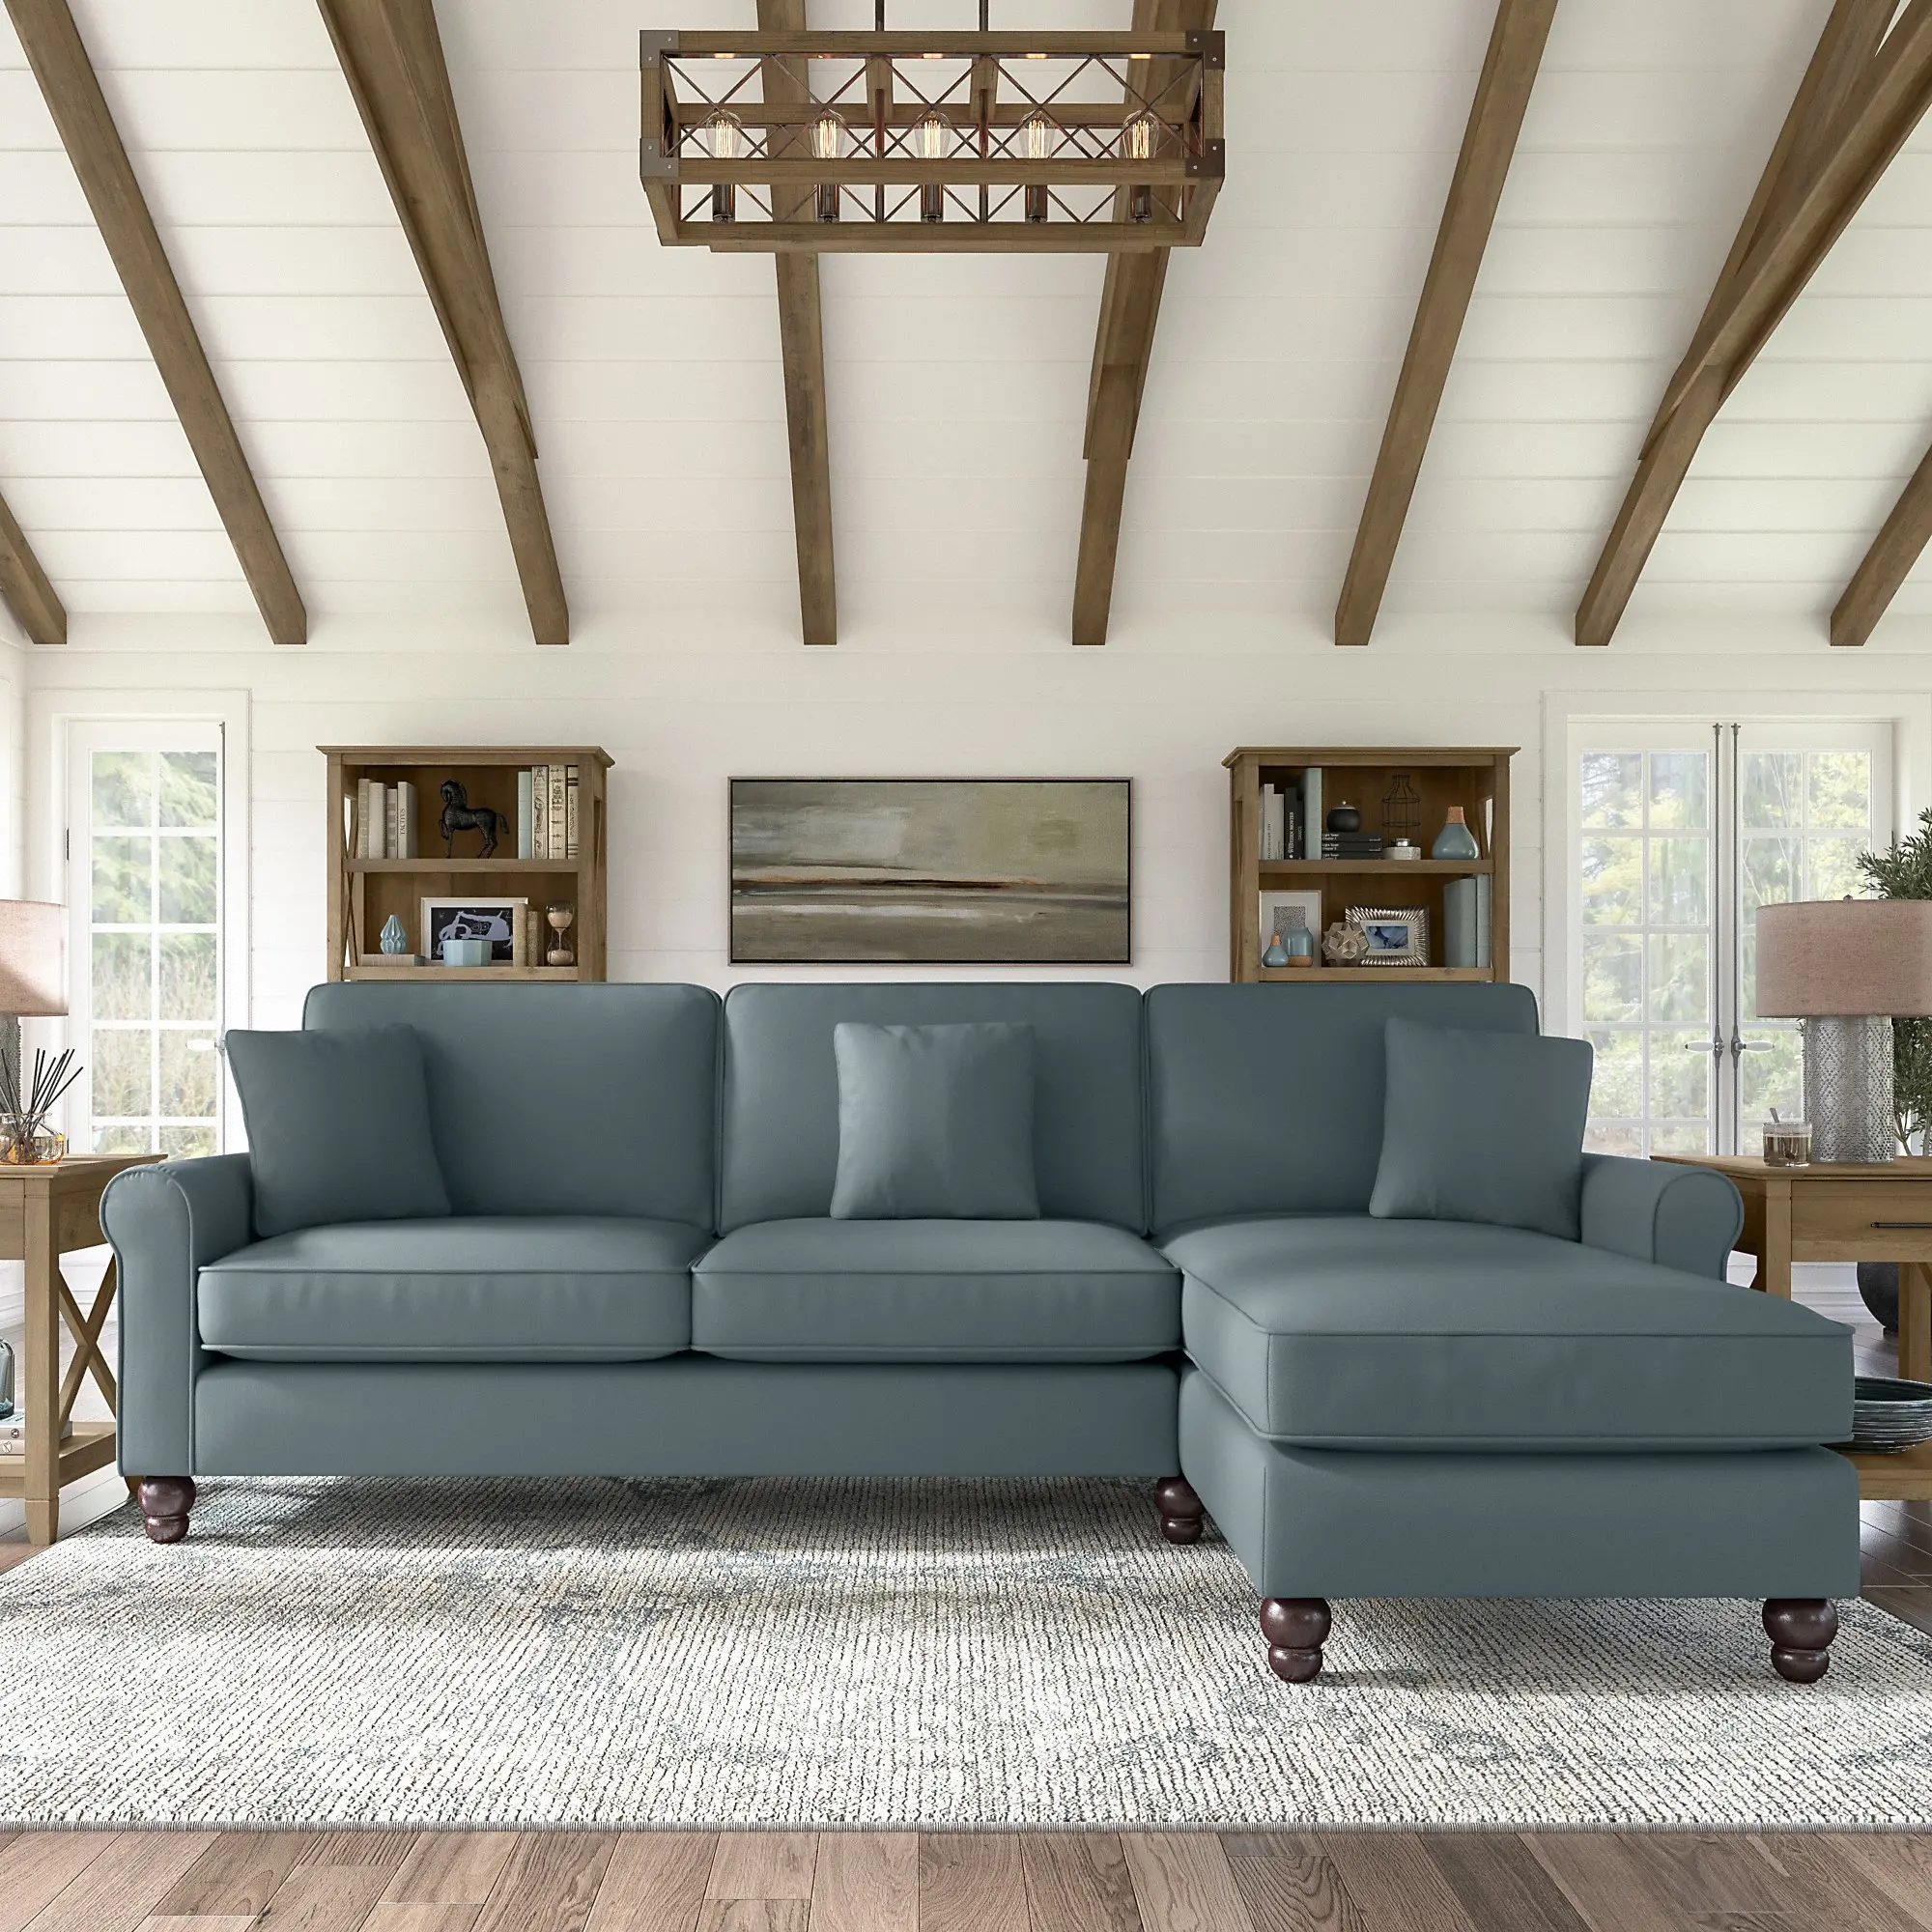 HDY102BTBH-03K Hudson Blue Sectional with Reversible Chaise Loung sku HDY102BTBH-03K